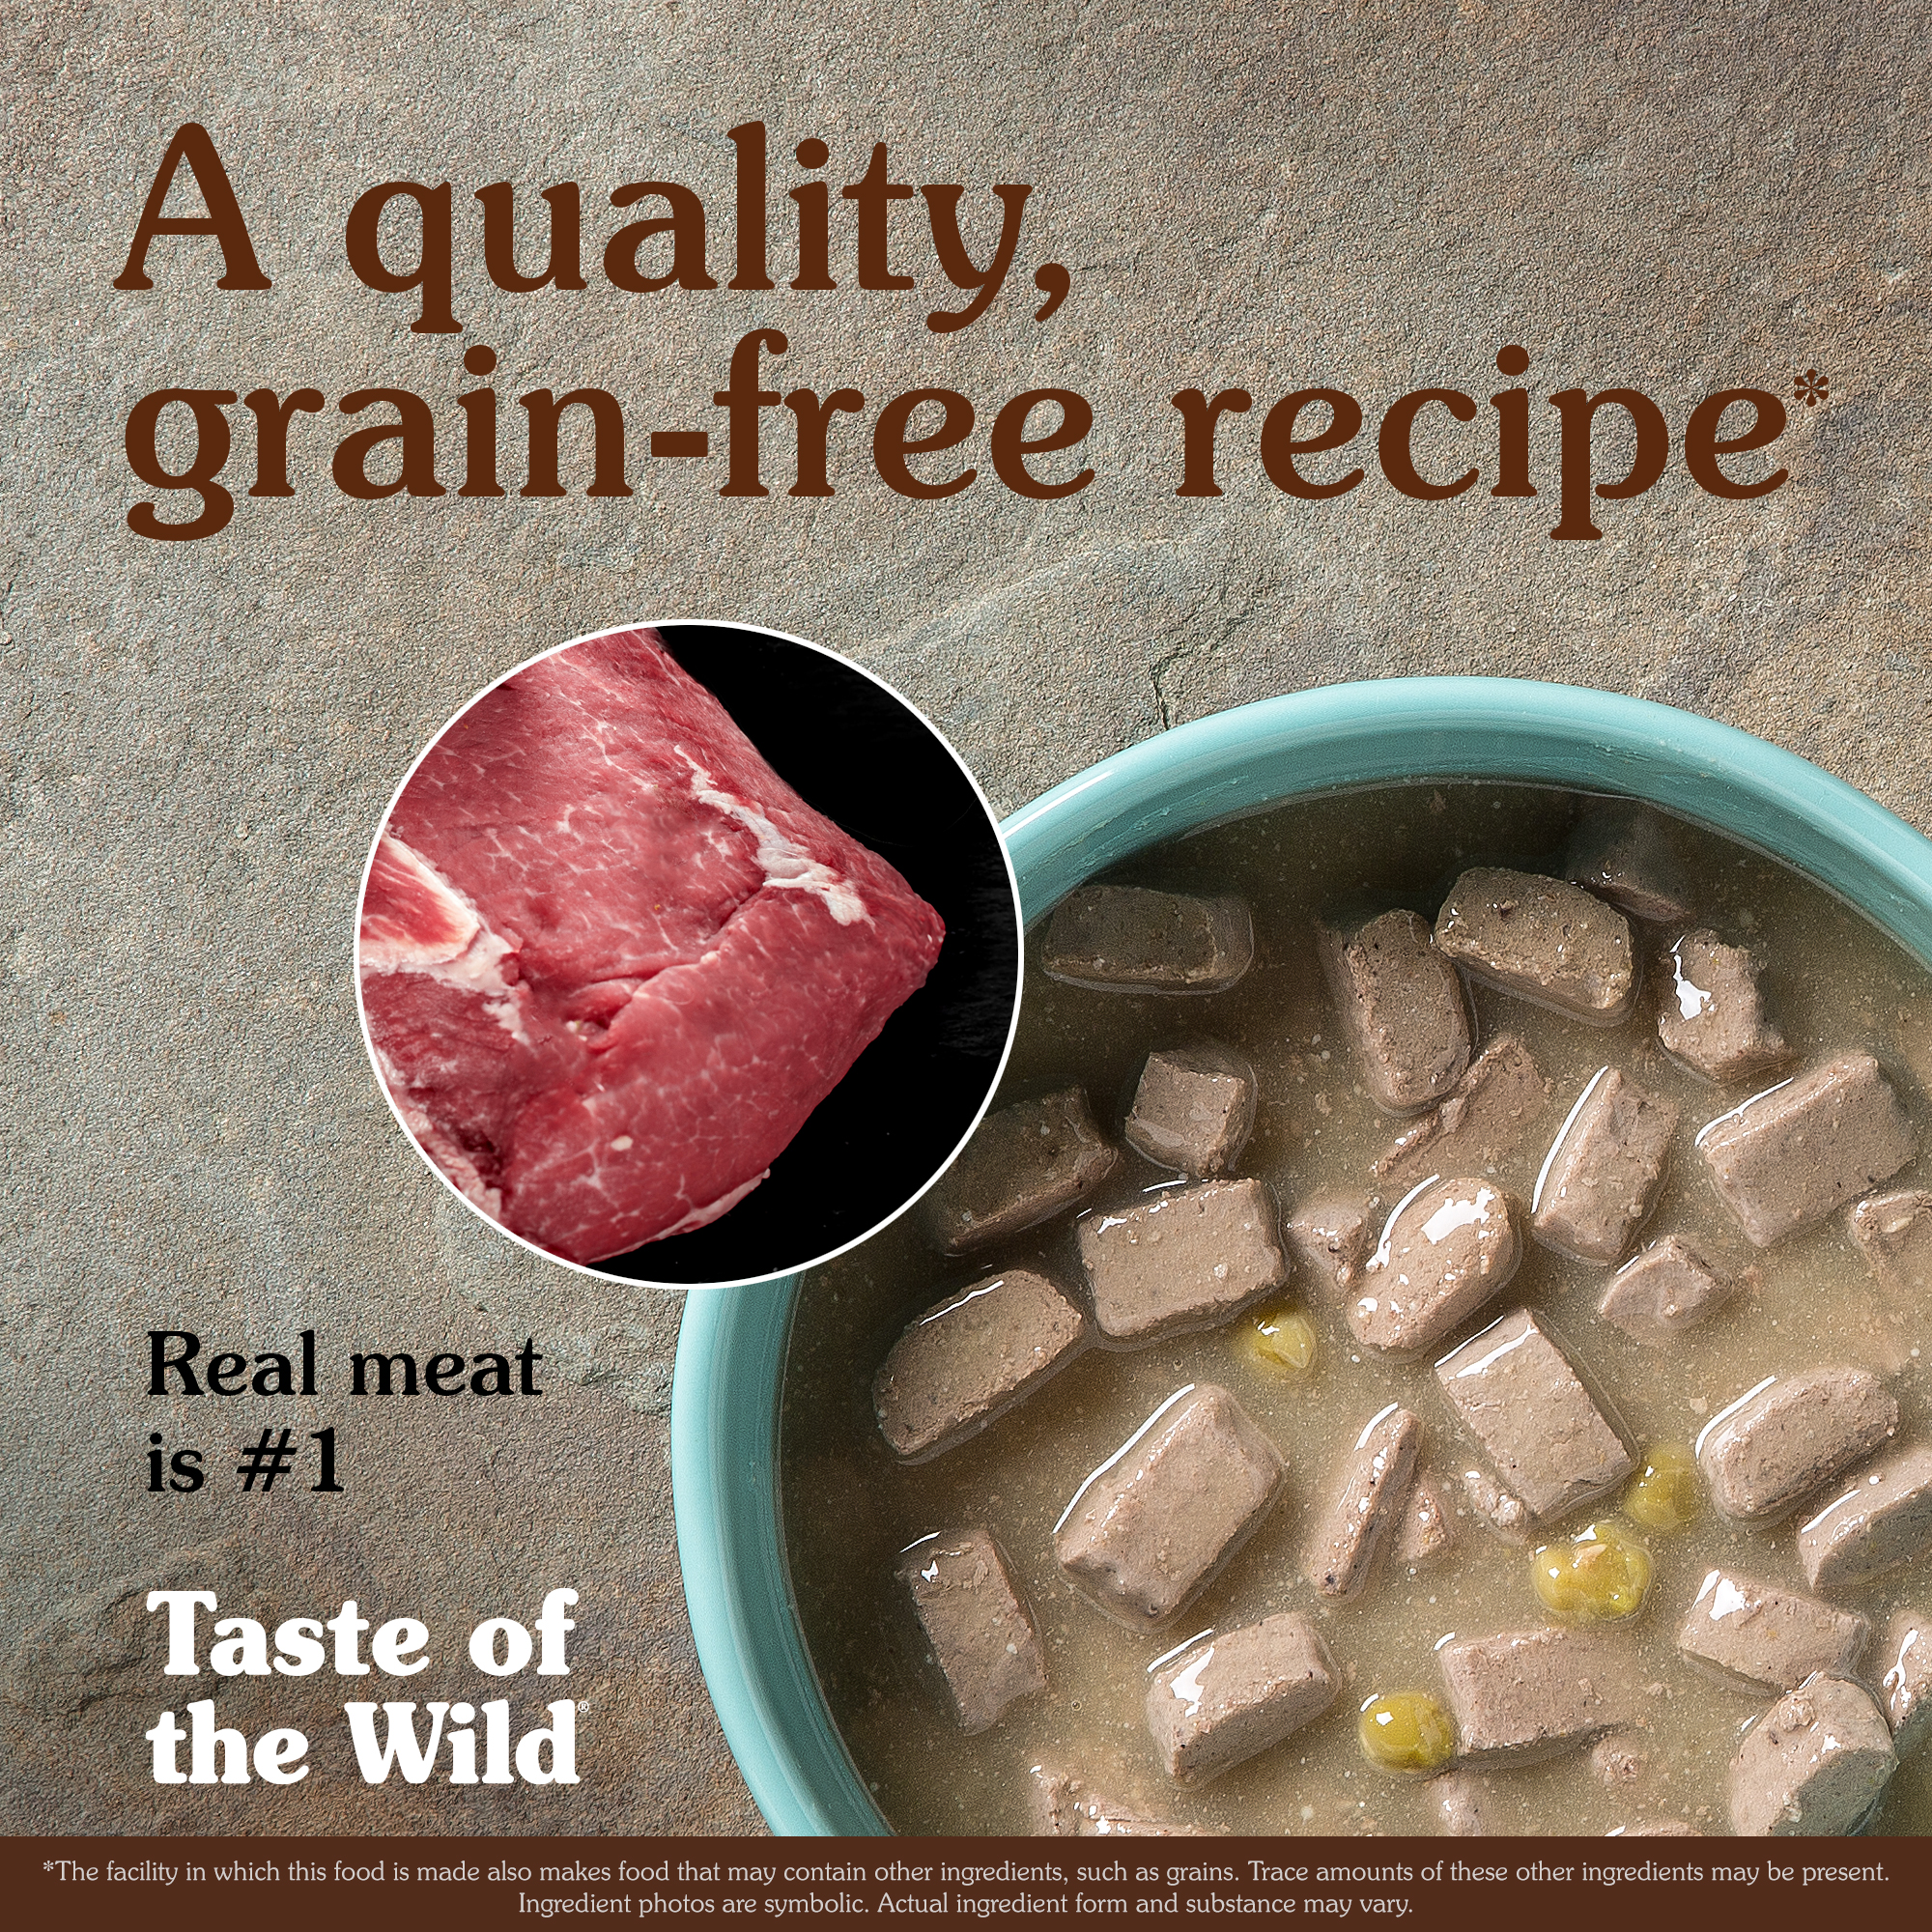 A blue ceramic bowl full of Southwest Canyon Canine Recipe with Beef in Gravy with a circular overlay image containing a cut of real beef meat.